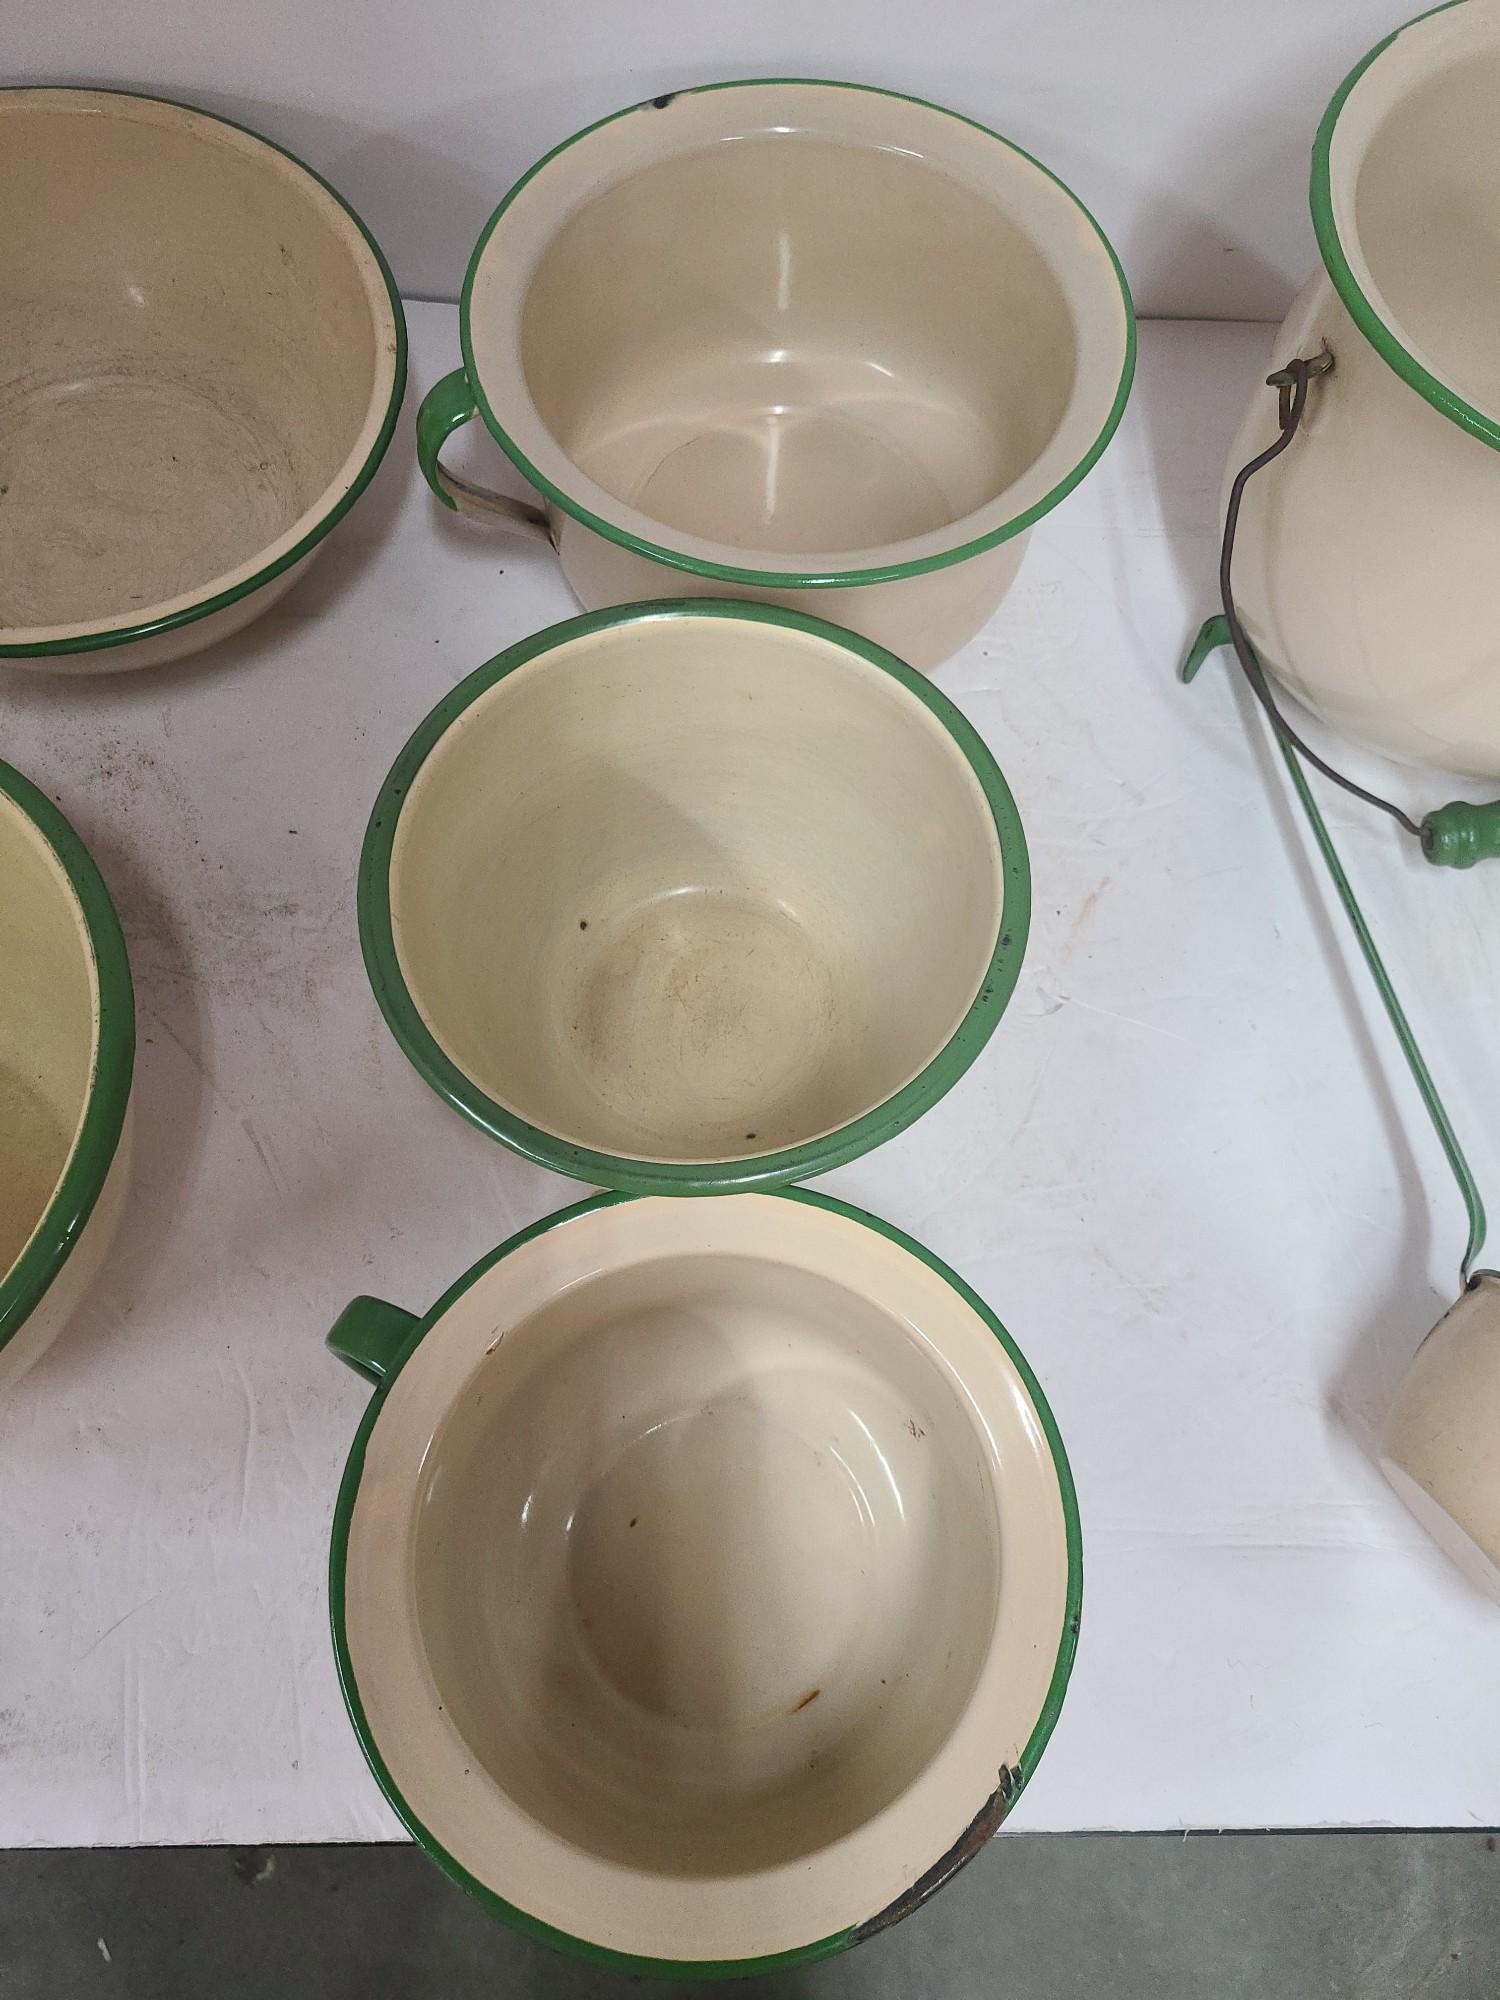 Enamel Wear 1 Kettle, 5 Mixing Bowl, and a Ladle